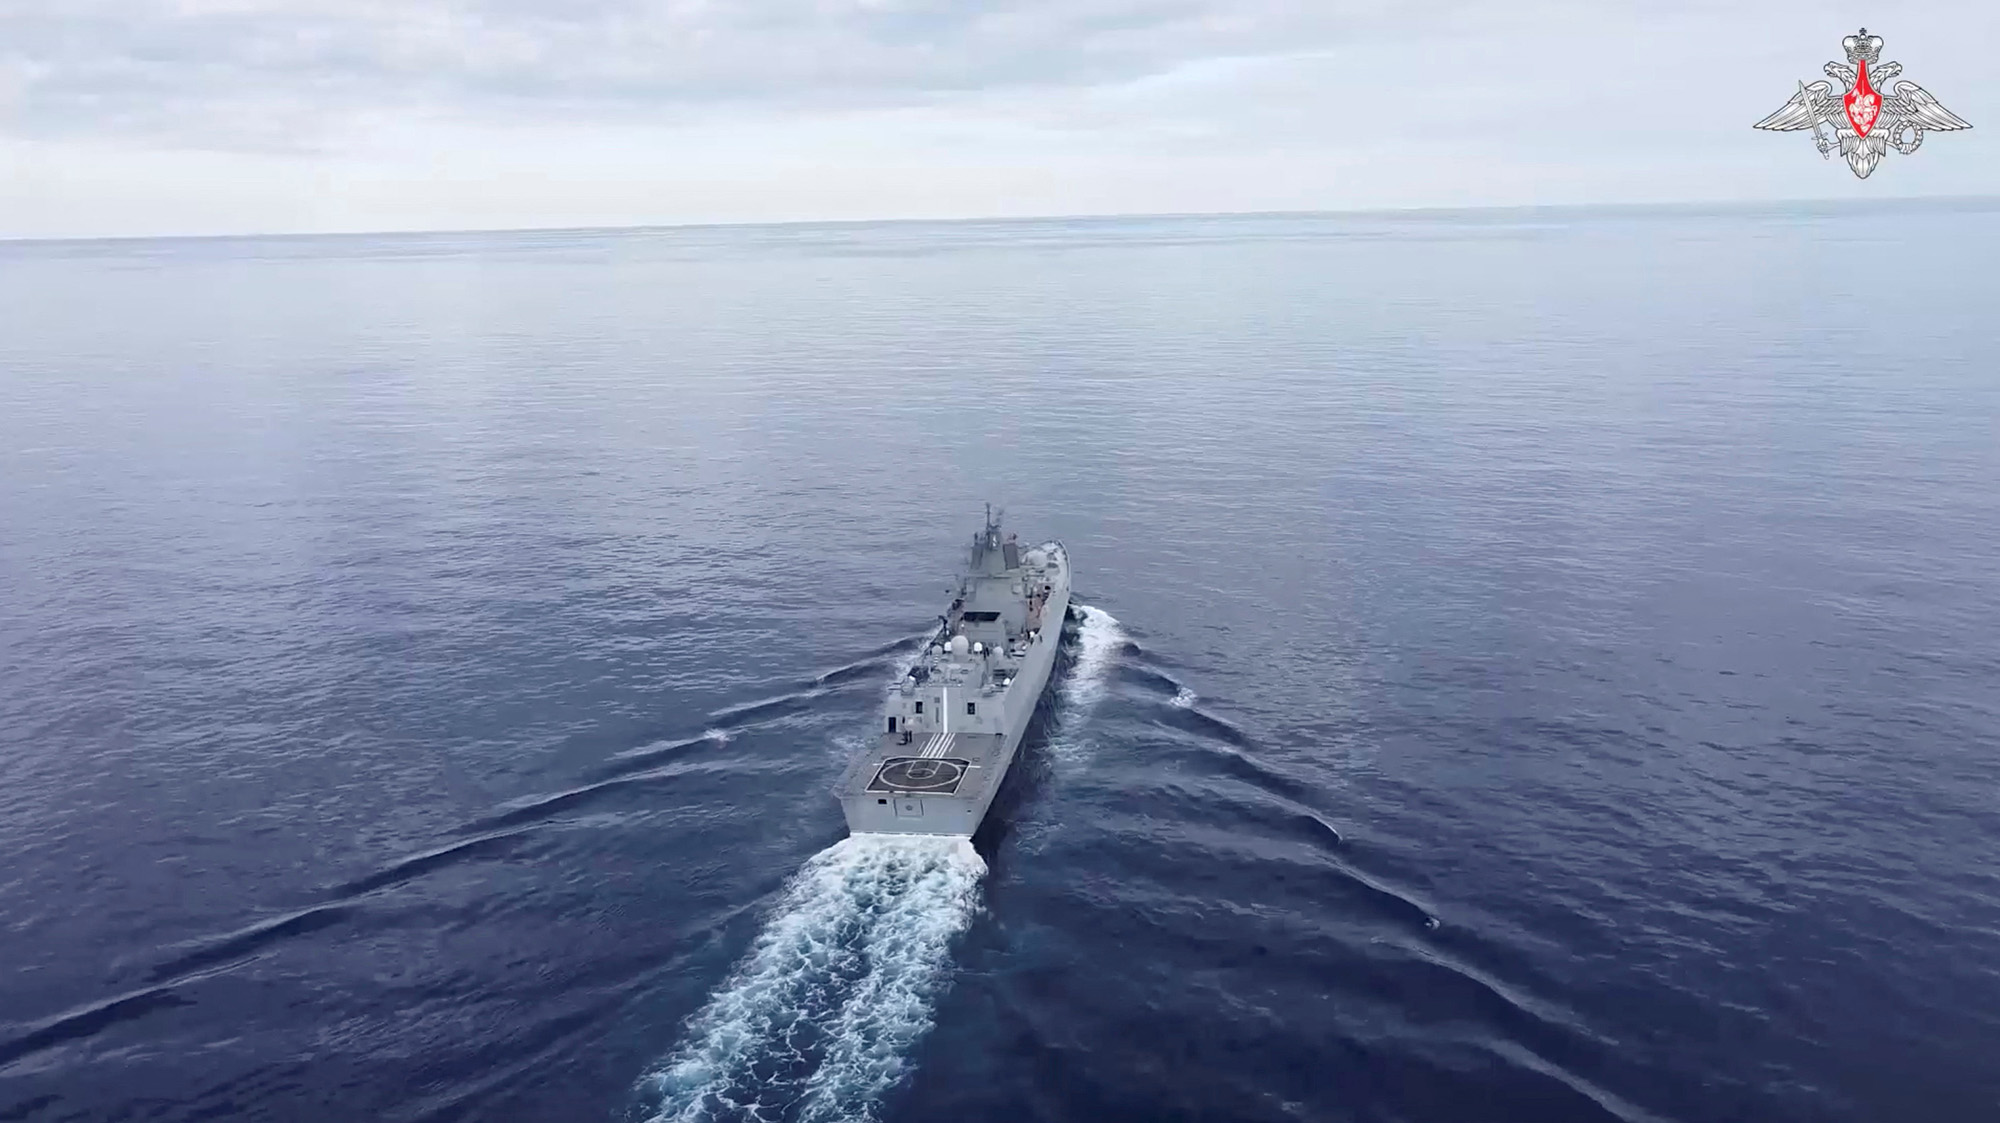 A still image from video released by the Russian Defence Ministry shows what it said to be frigate 'Admiral Gorshkov' during an exercise in the Atlantic Ocean, released on January 25.